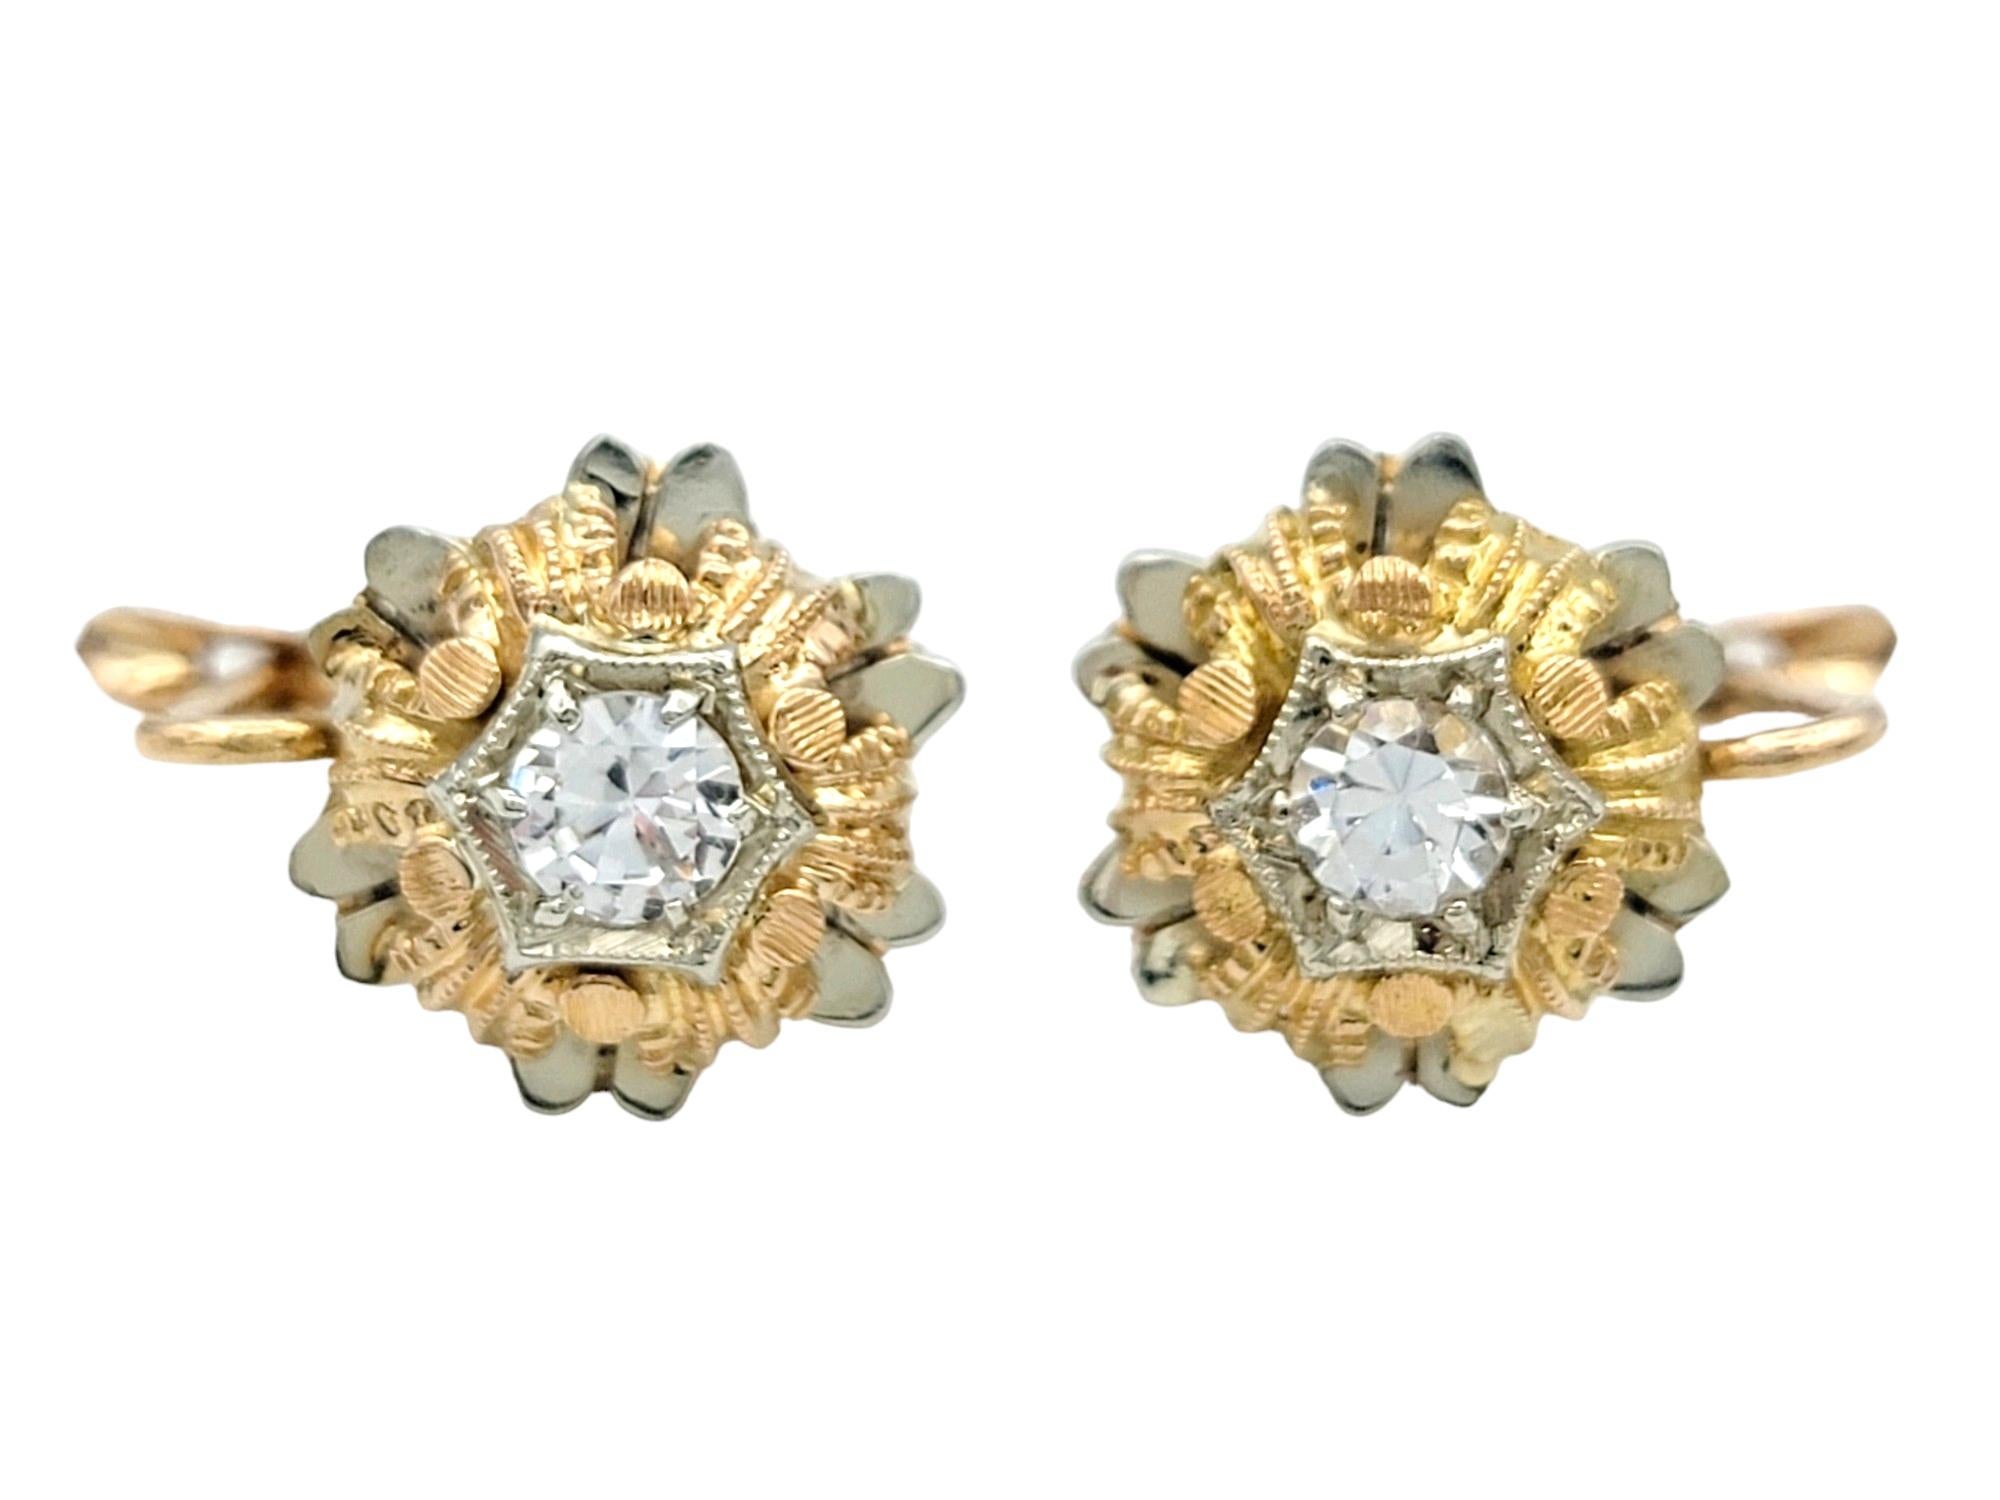 These captivating earrings, set in a luxurious combination of 18 karat yellow and white gold, boast a mesmerizing design that elegantly showcases a lab-created colorless round spinel at its center. The intricate metalwork surrounding the spinel